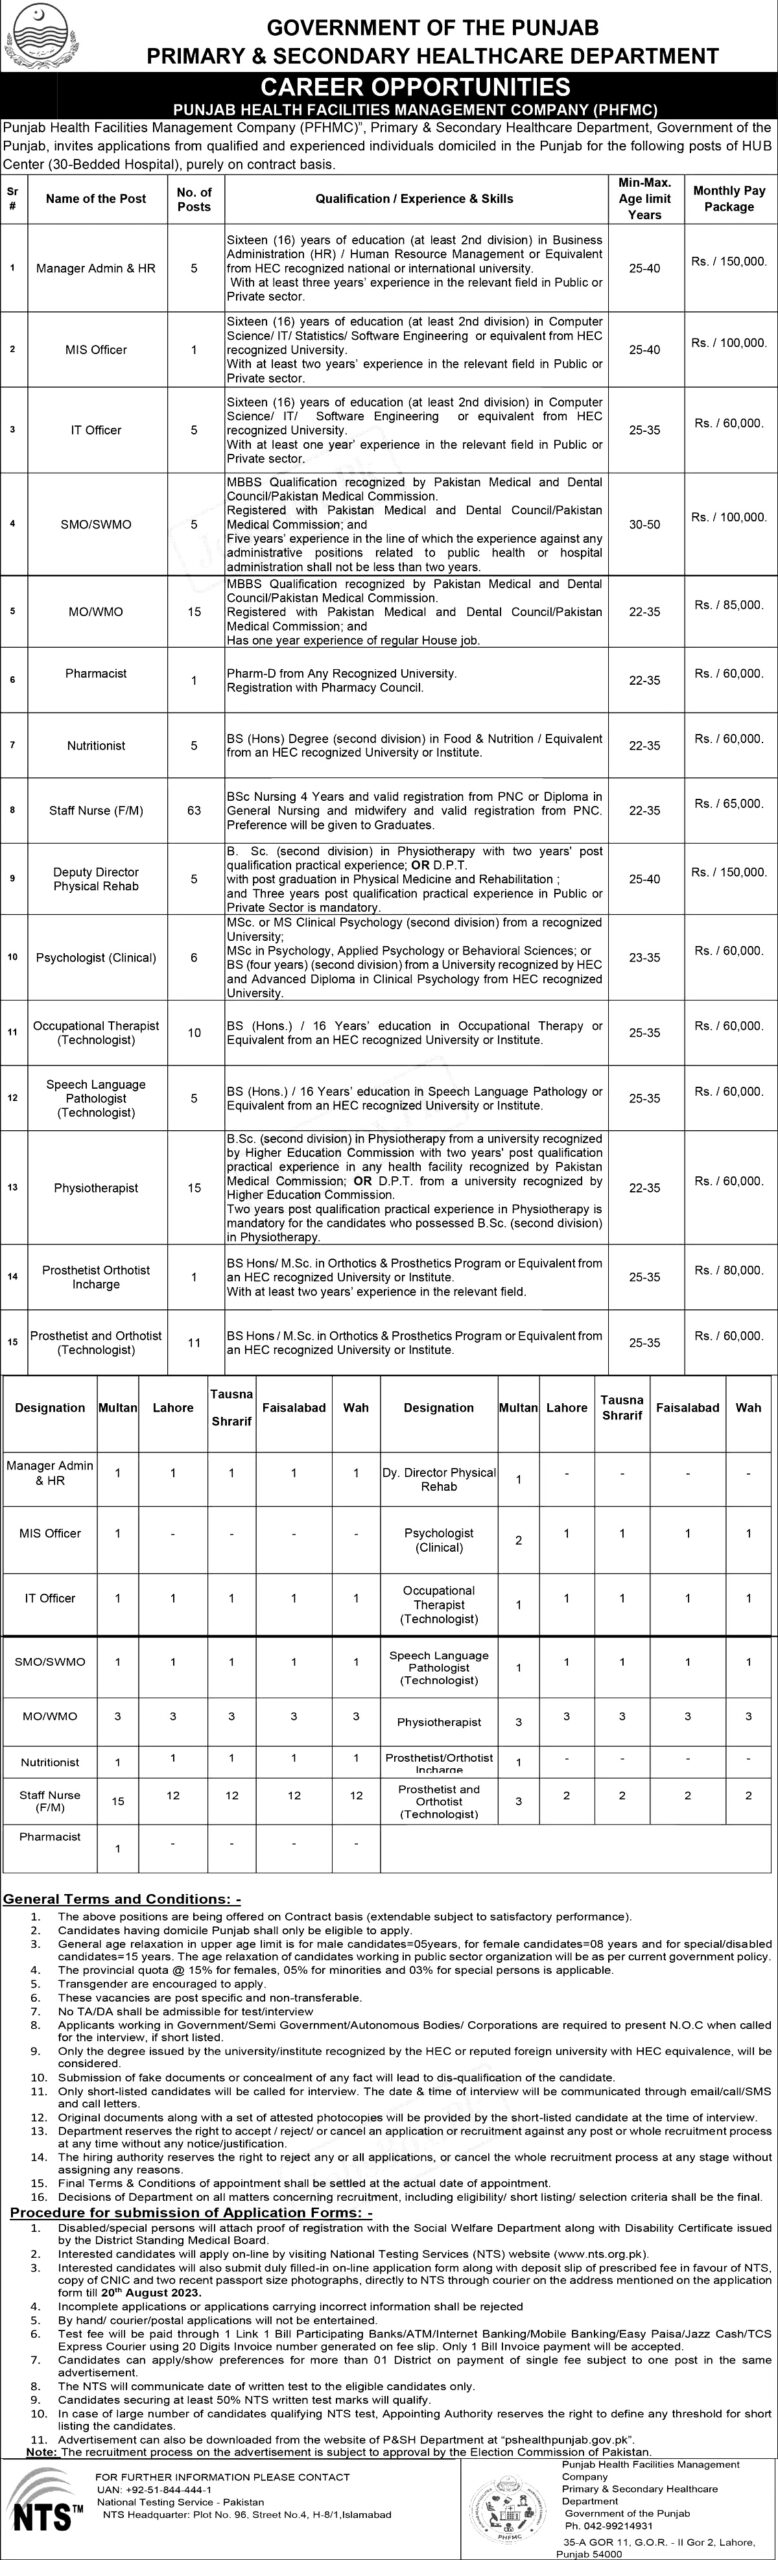 Punjab Primary & Secondary Healthcare Jobs NTS Apply Online